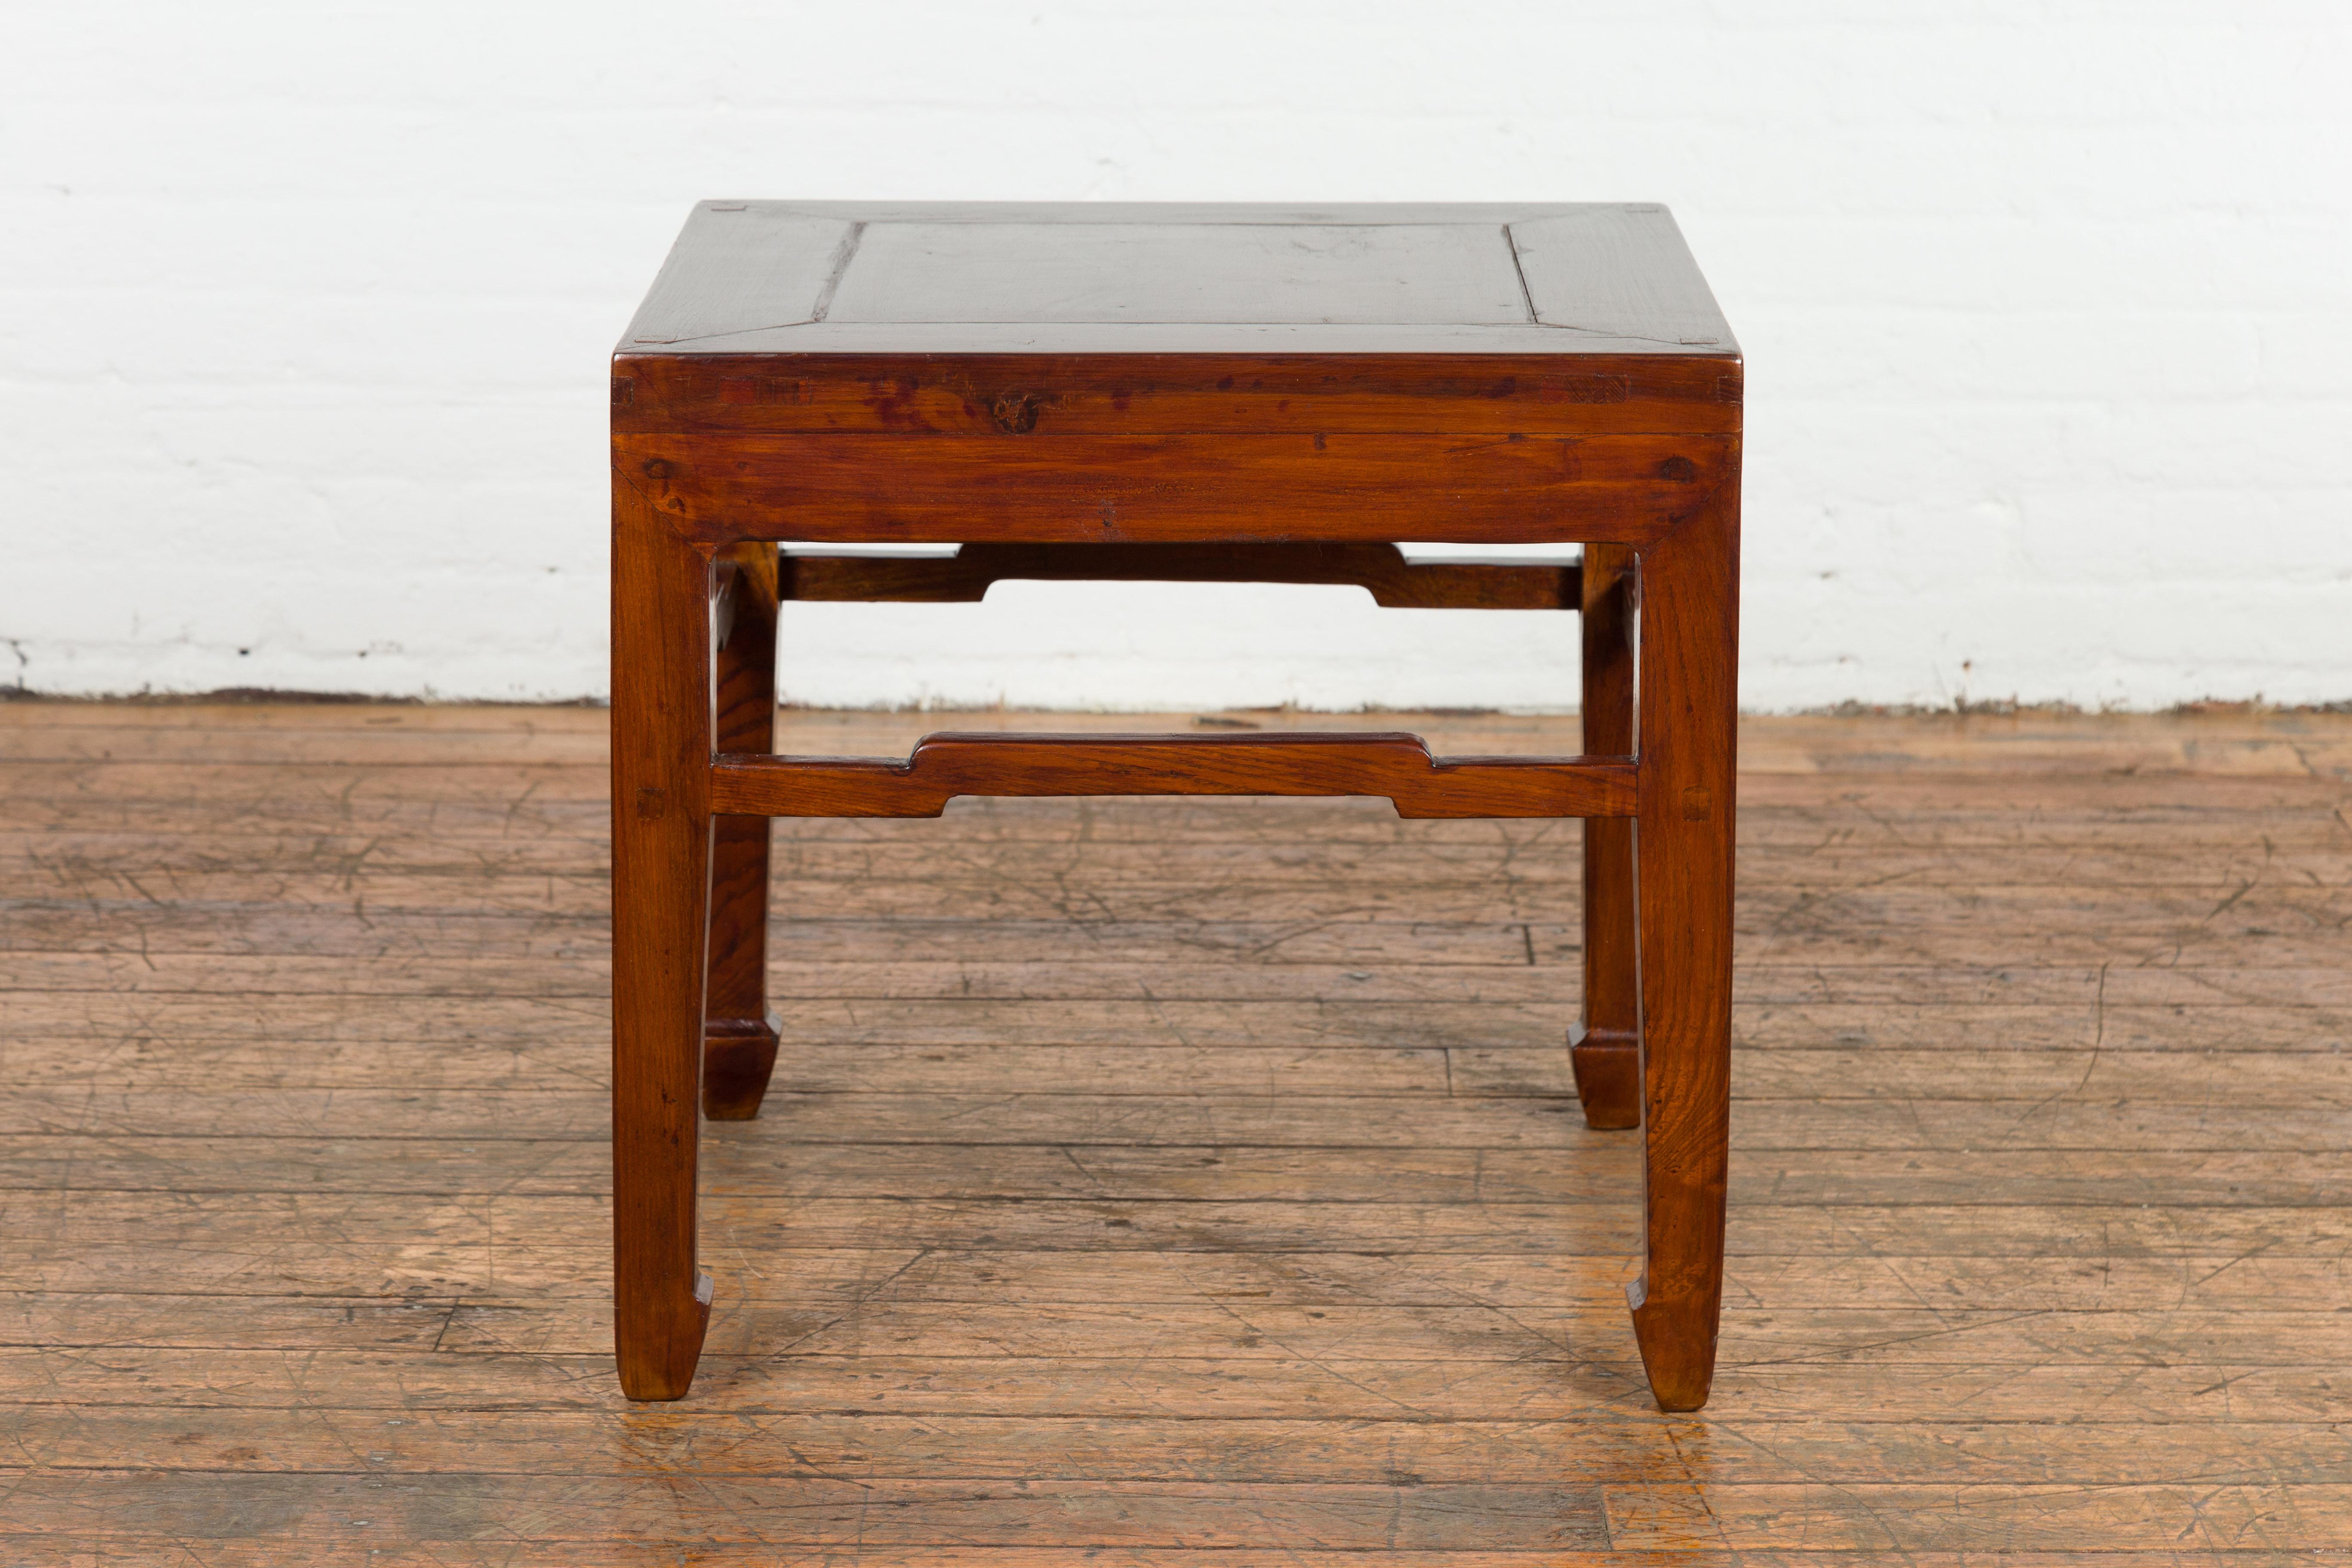 Chinese Qing Dynasty Period 19th Century Side Table with Humpback Stretchers For Sale 8